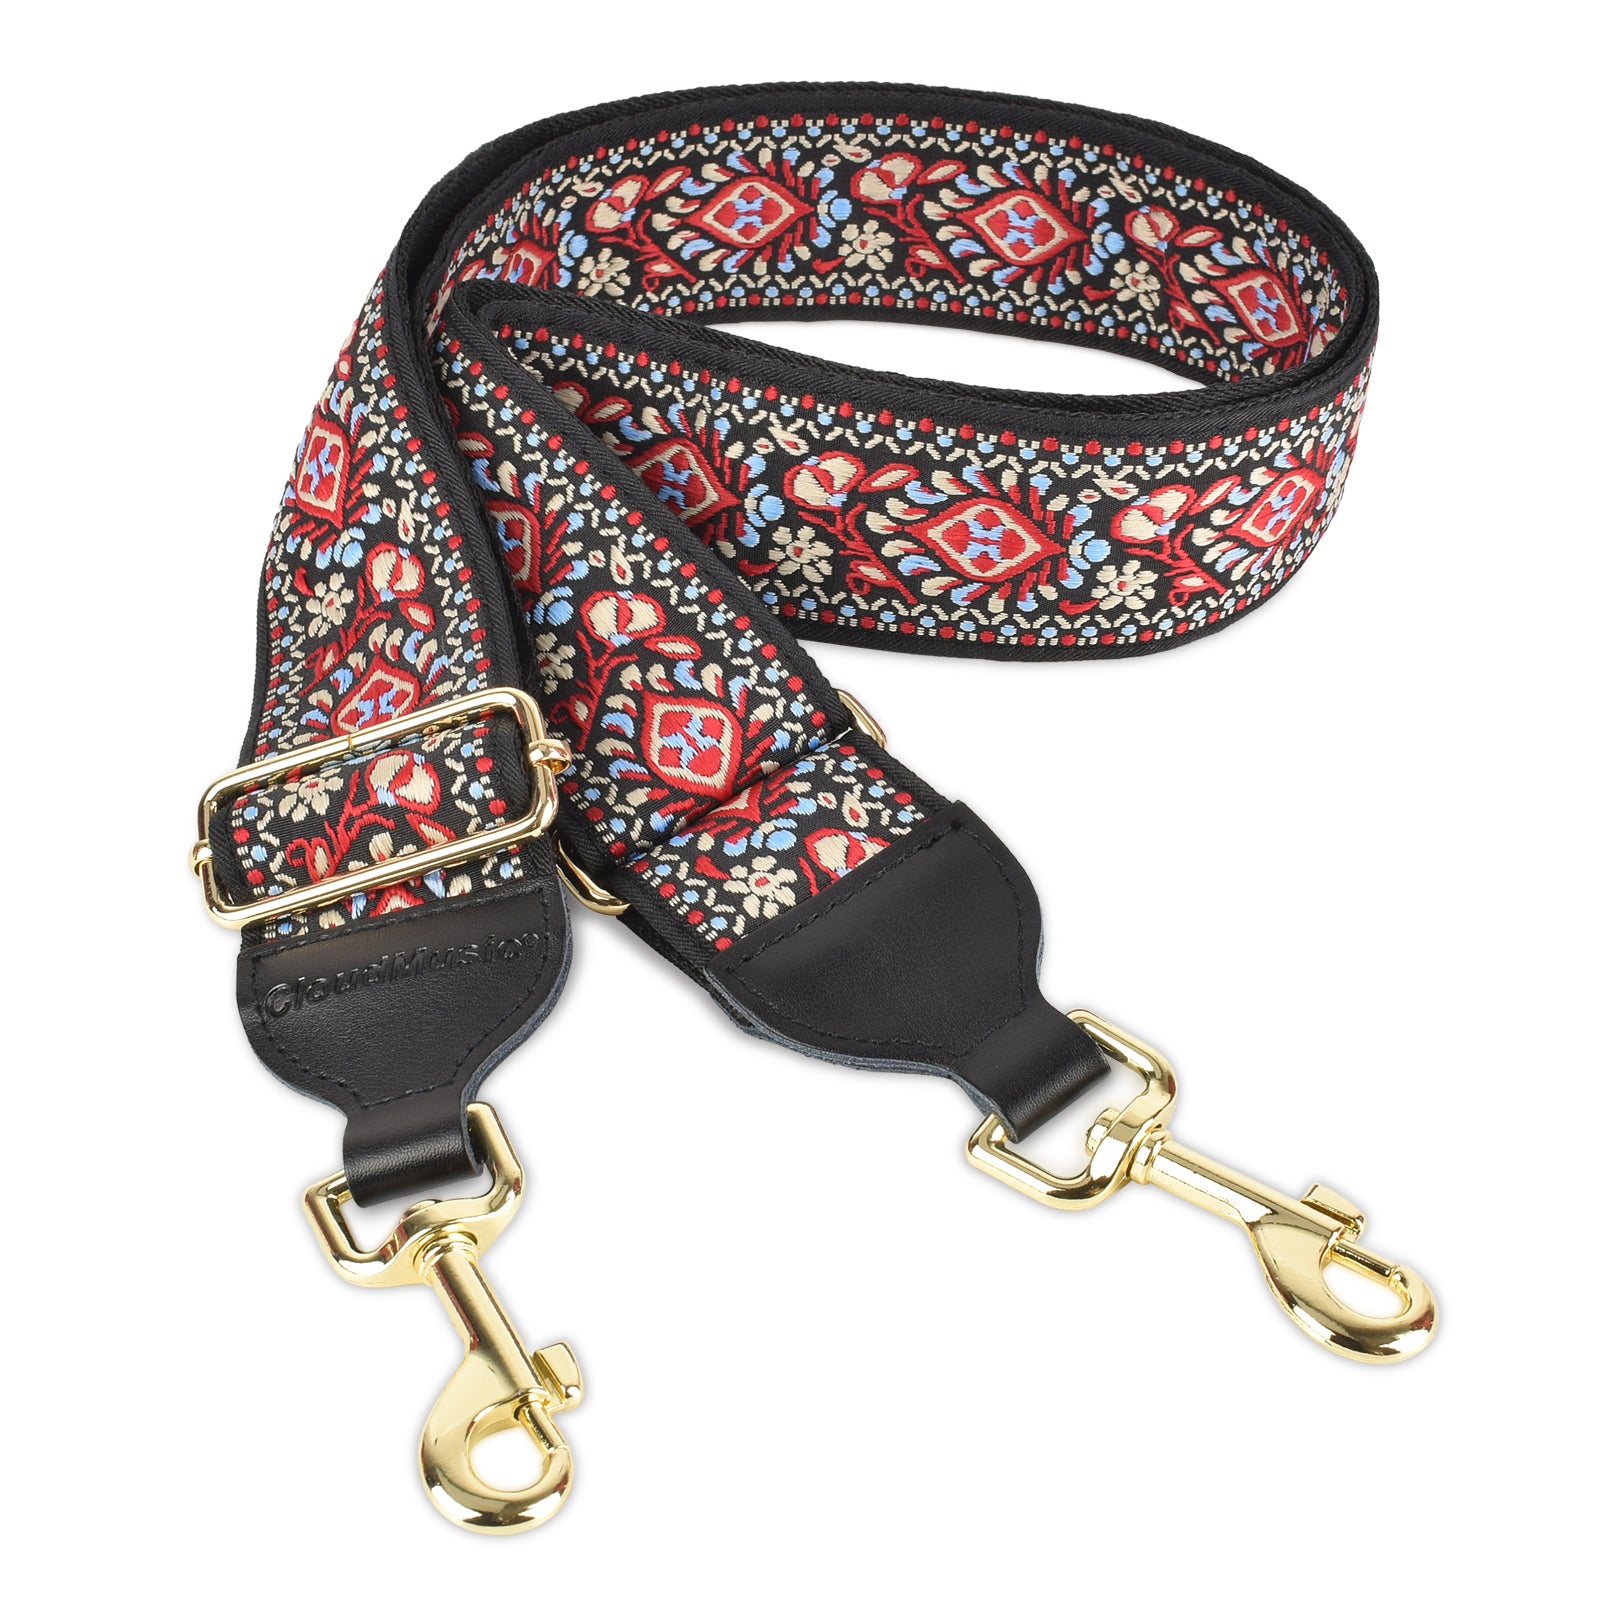 DOAPMLL Wide Purse Straps Replacement Adjustable India | Ubuy